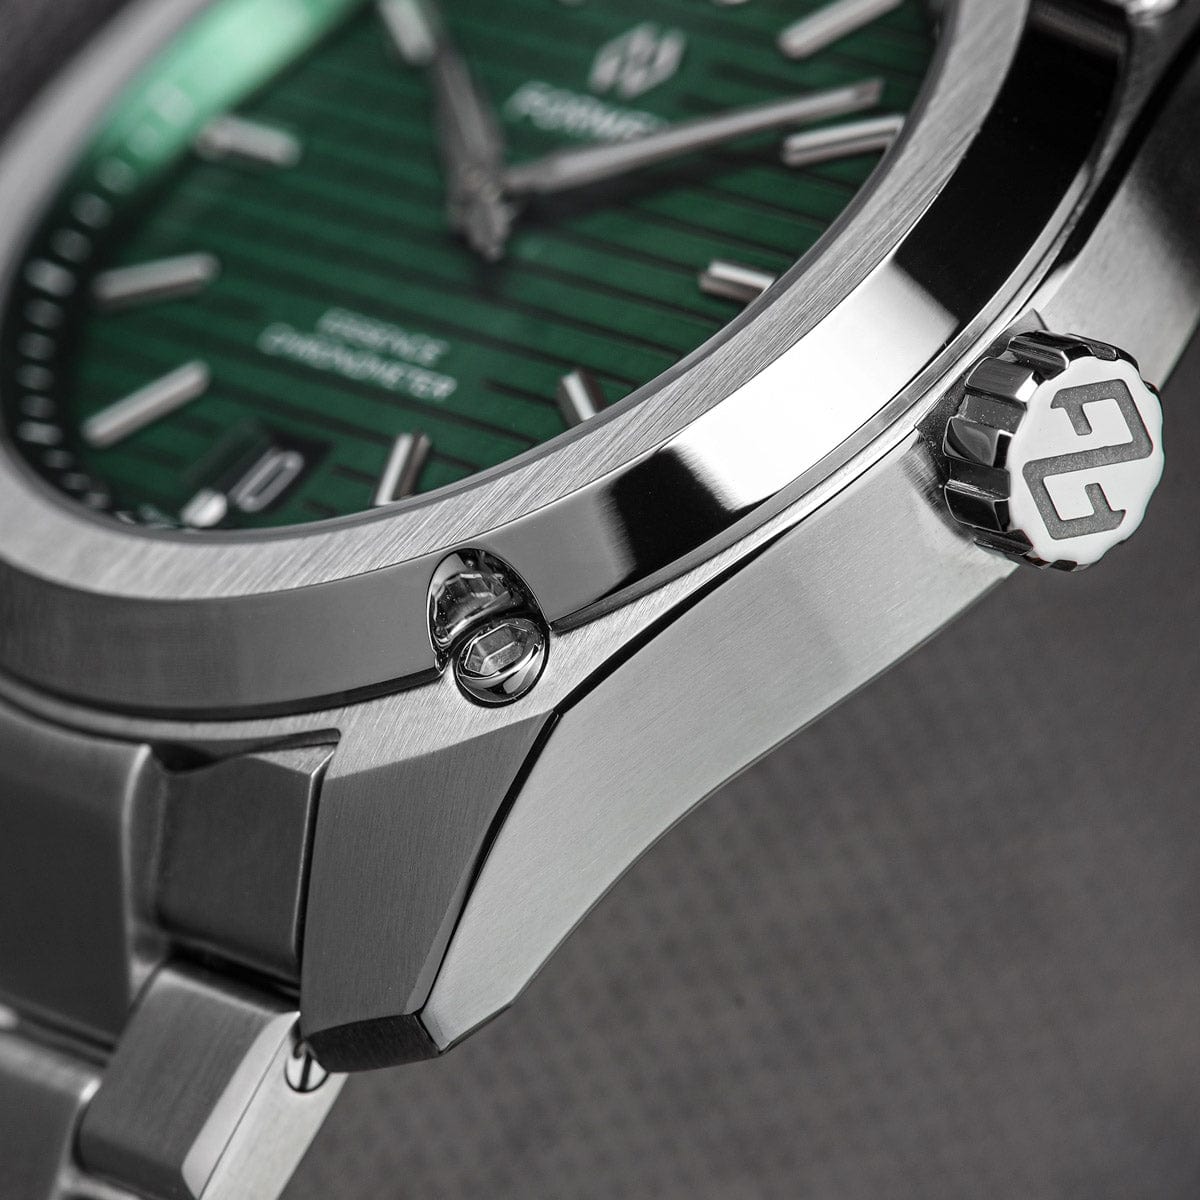 Formex Essence 39 Automatic Chronometer - Green Dial / Green Leather Strap